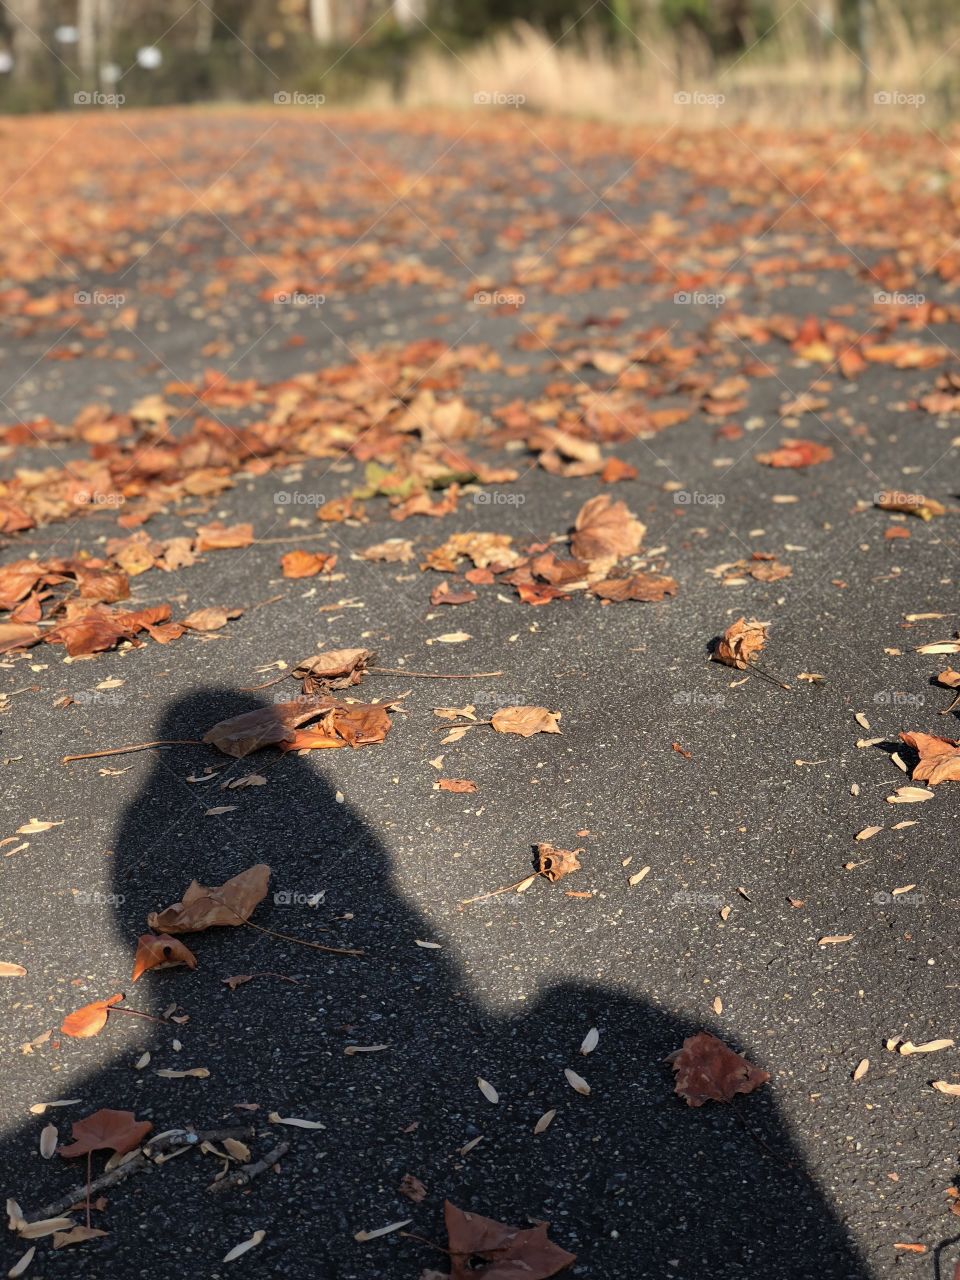 Leaves fallen on the pavement with a silhouette of a person
